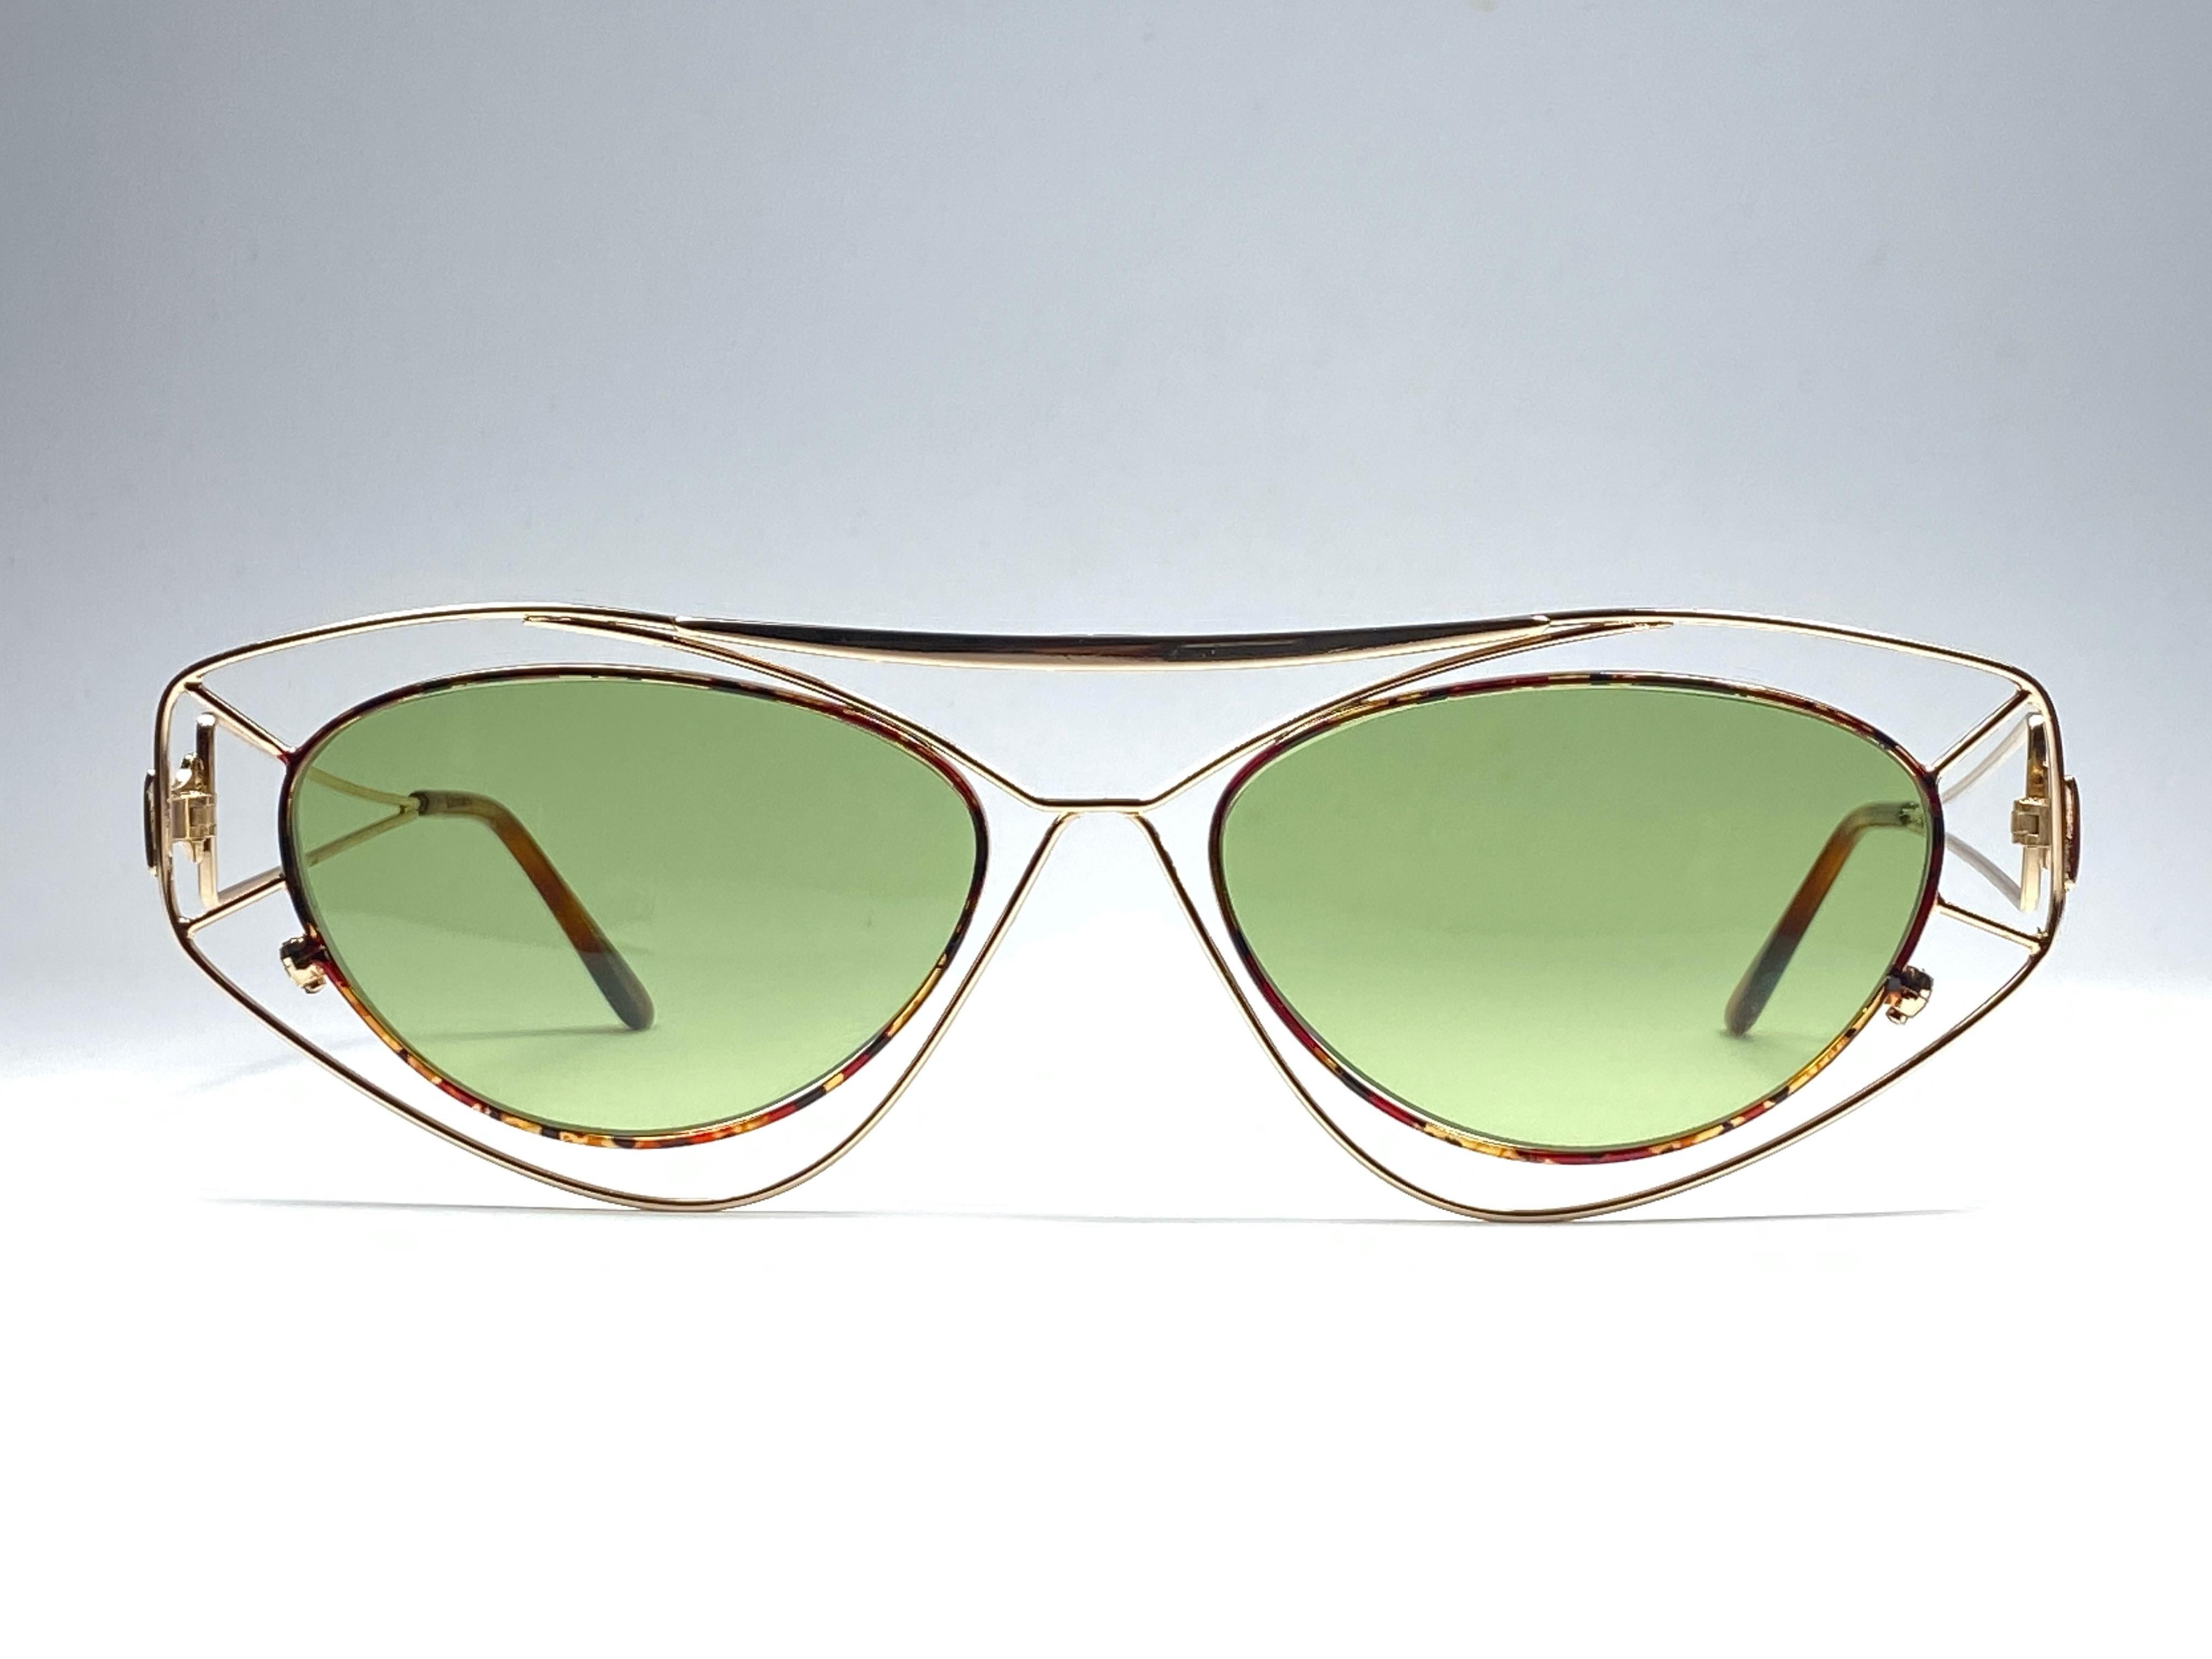 New Vintage in the style of Paloma Picasso gold with tortoise inserts sunglasses. 
Light green lenses.
Made in  1980's. 

Frame with minor wear and tarnish due to storage. 

Front : 15 cms

Lens Height : 4 cms

Lens Width : 5 cms
